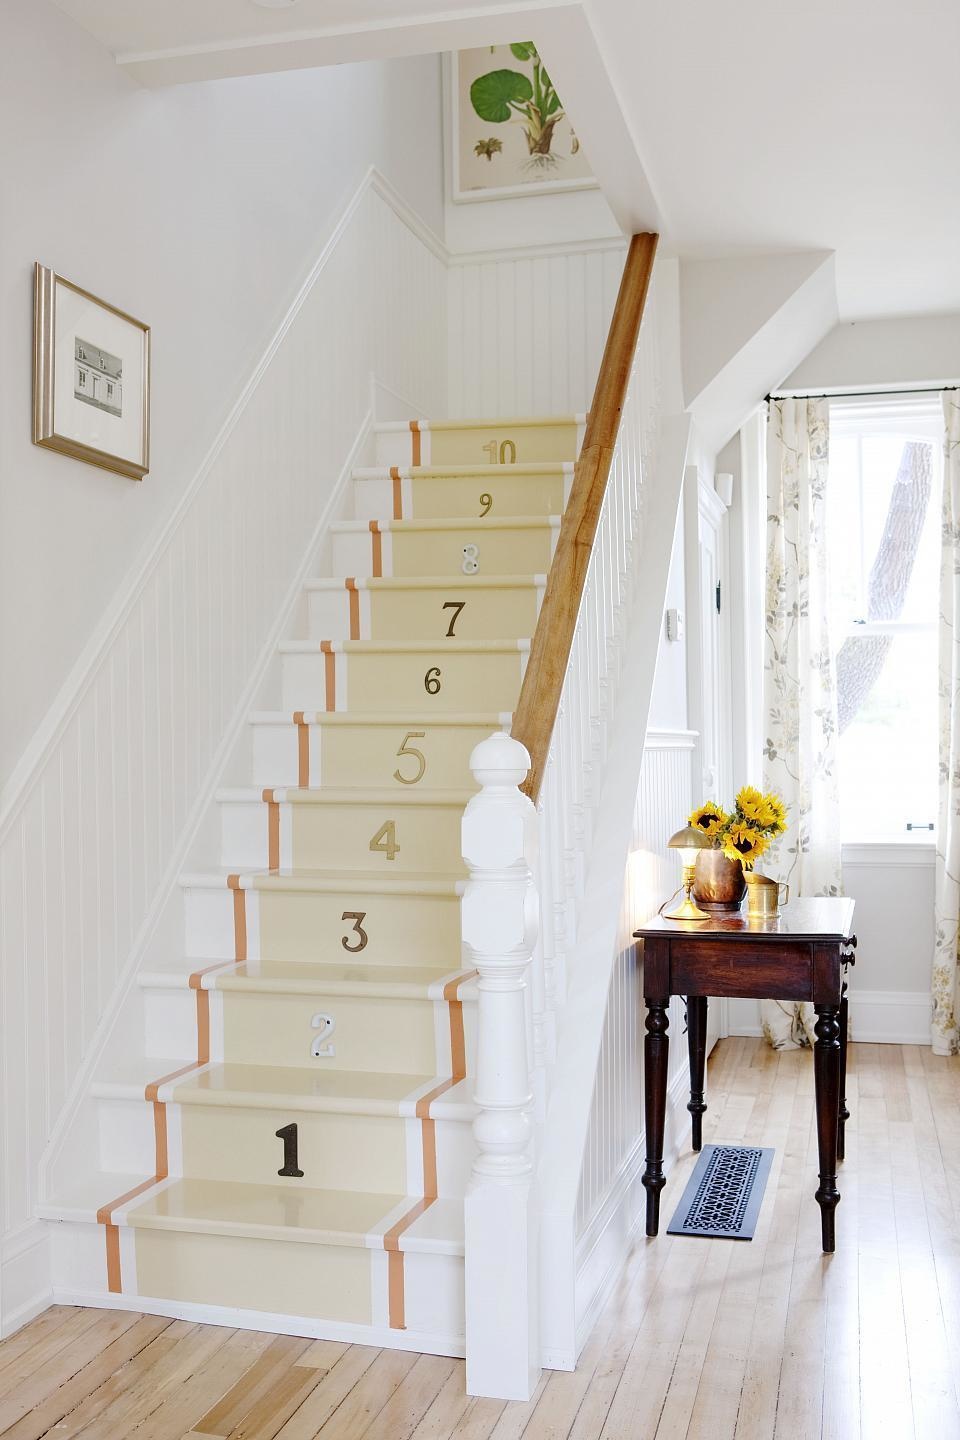 Try painting the stairs. You can paint just the risers, the platforms, or the whole thing. 